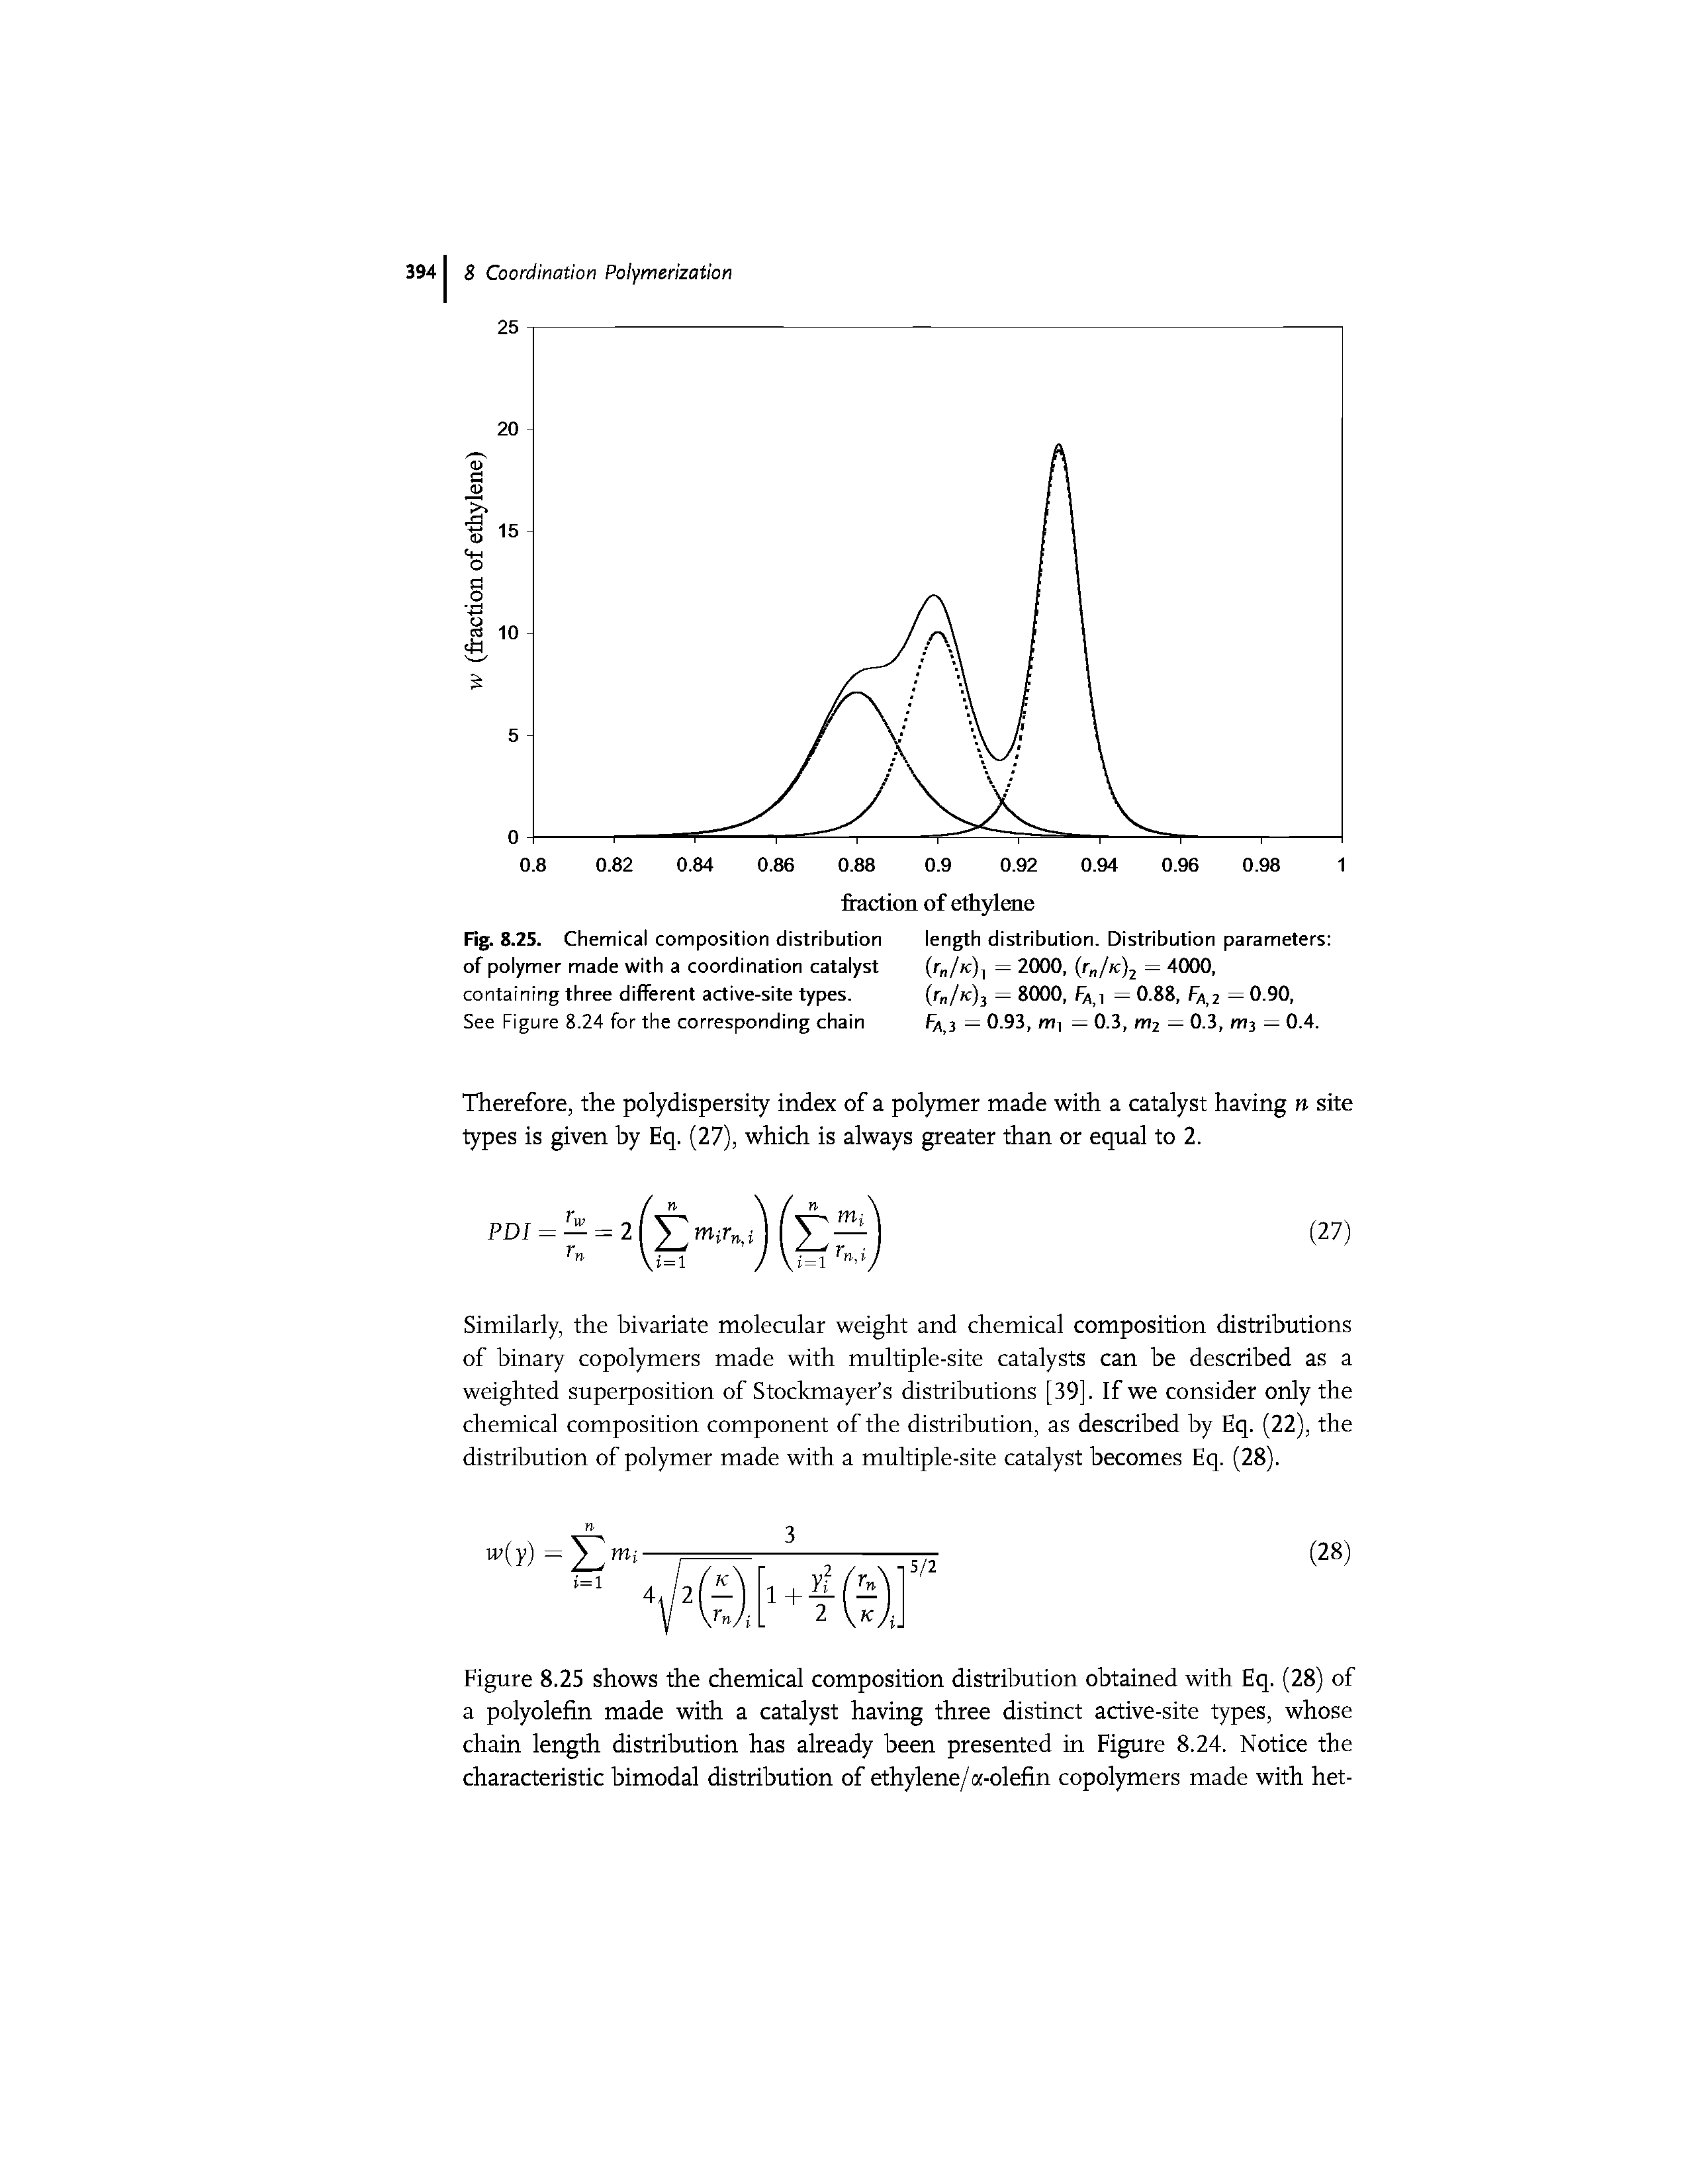 Figure 8.25 shows the chemical composition distribution obtained with Eq. (28) of a polyolefin made with a catalyst having three distinct active-site types, whose chain length distribution has already been presented in Figure 8.24. Notice the characteristic bimodal distribution of ethylene/a-olefin copolymers made with het-...